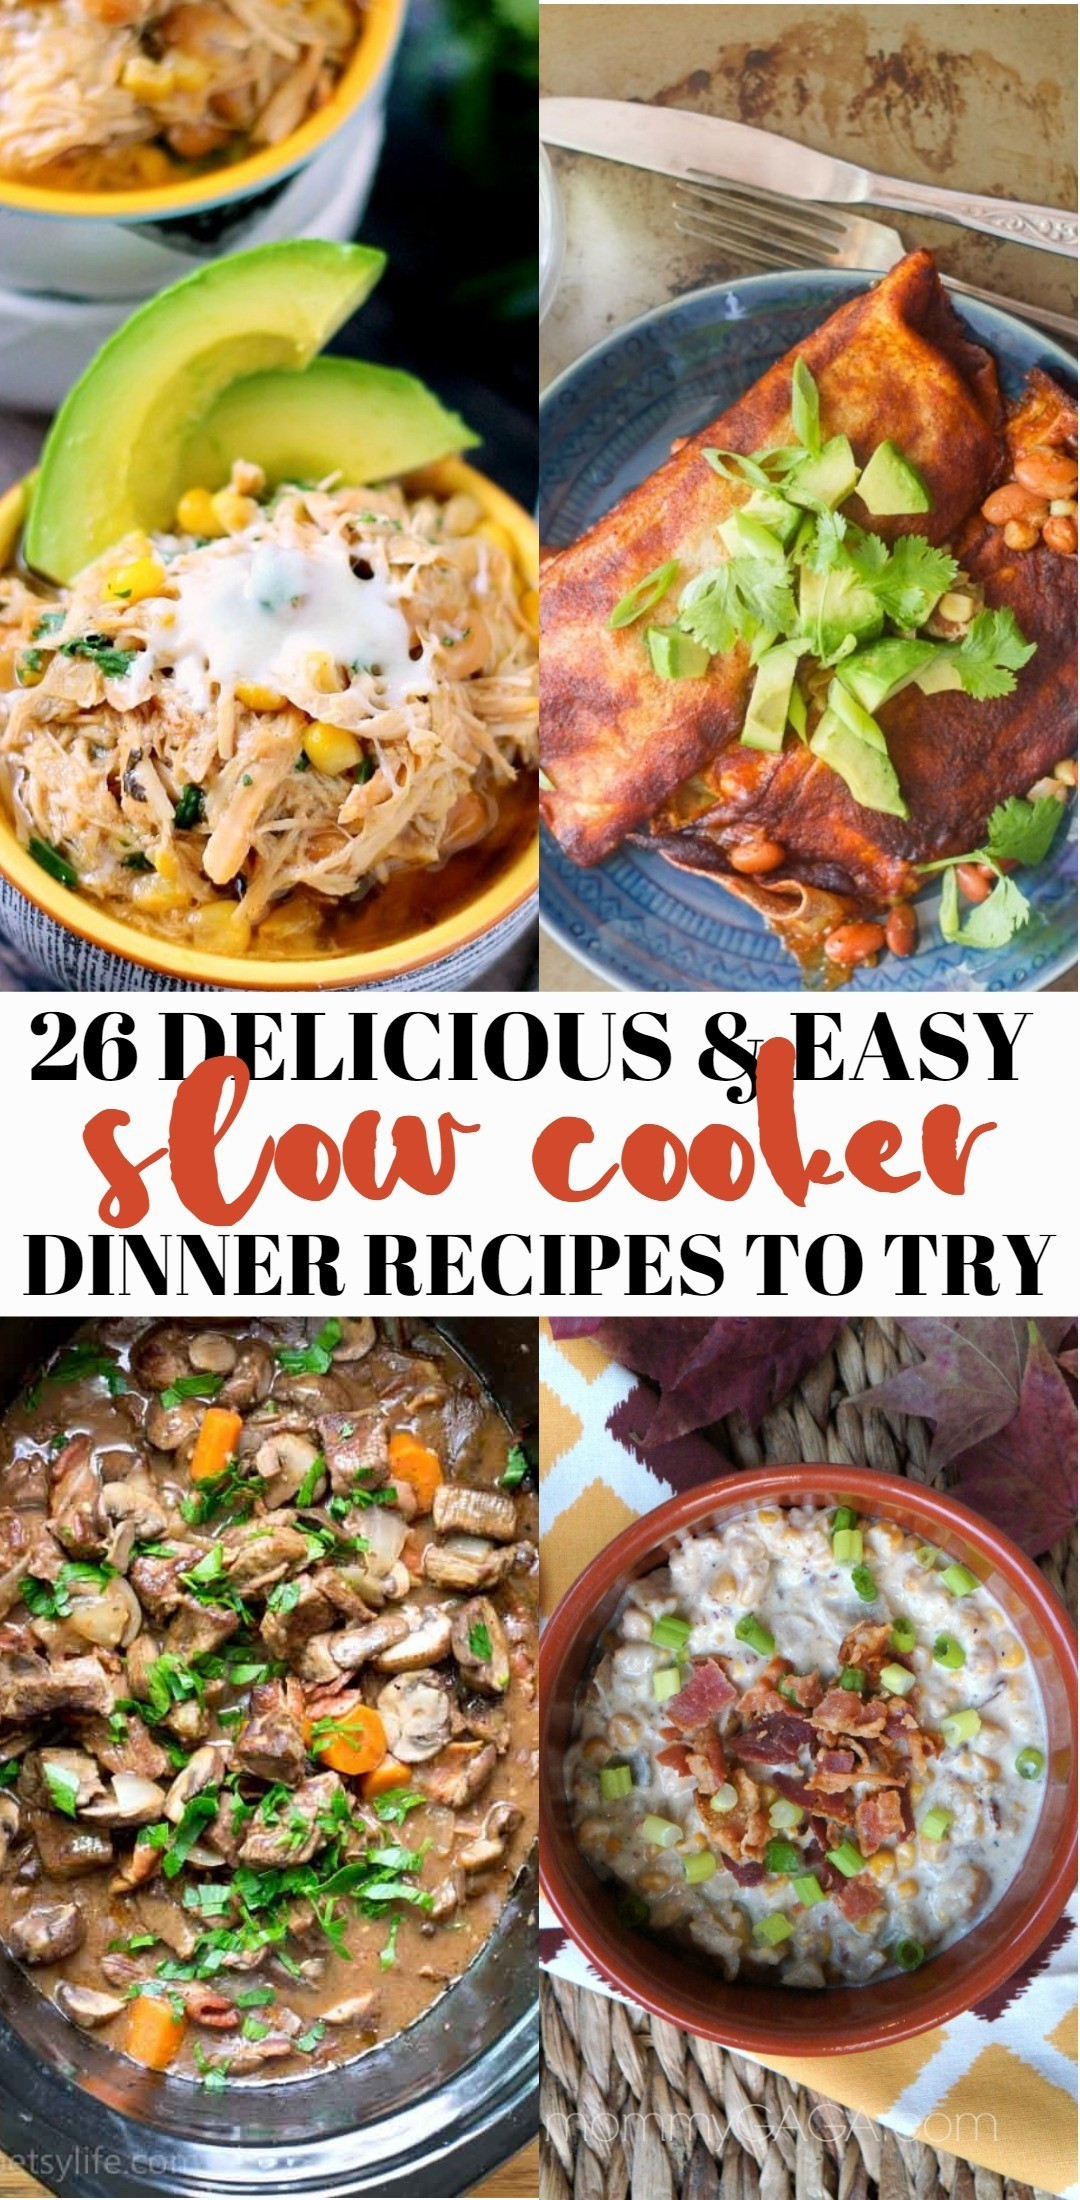 Delicious Dinner Ideas
 26 Delicious and Easy Slow Cooker Dinner Recipes Your